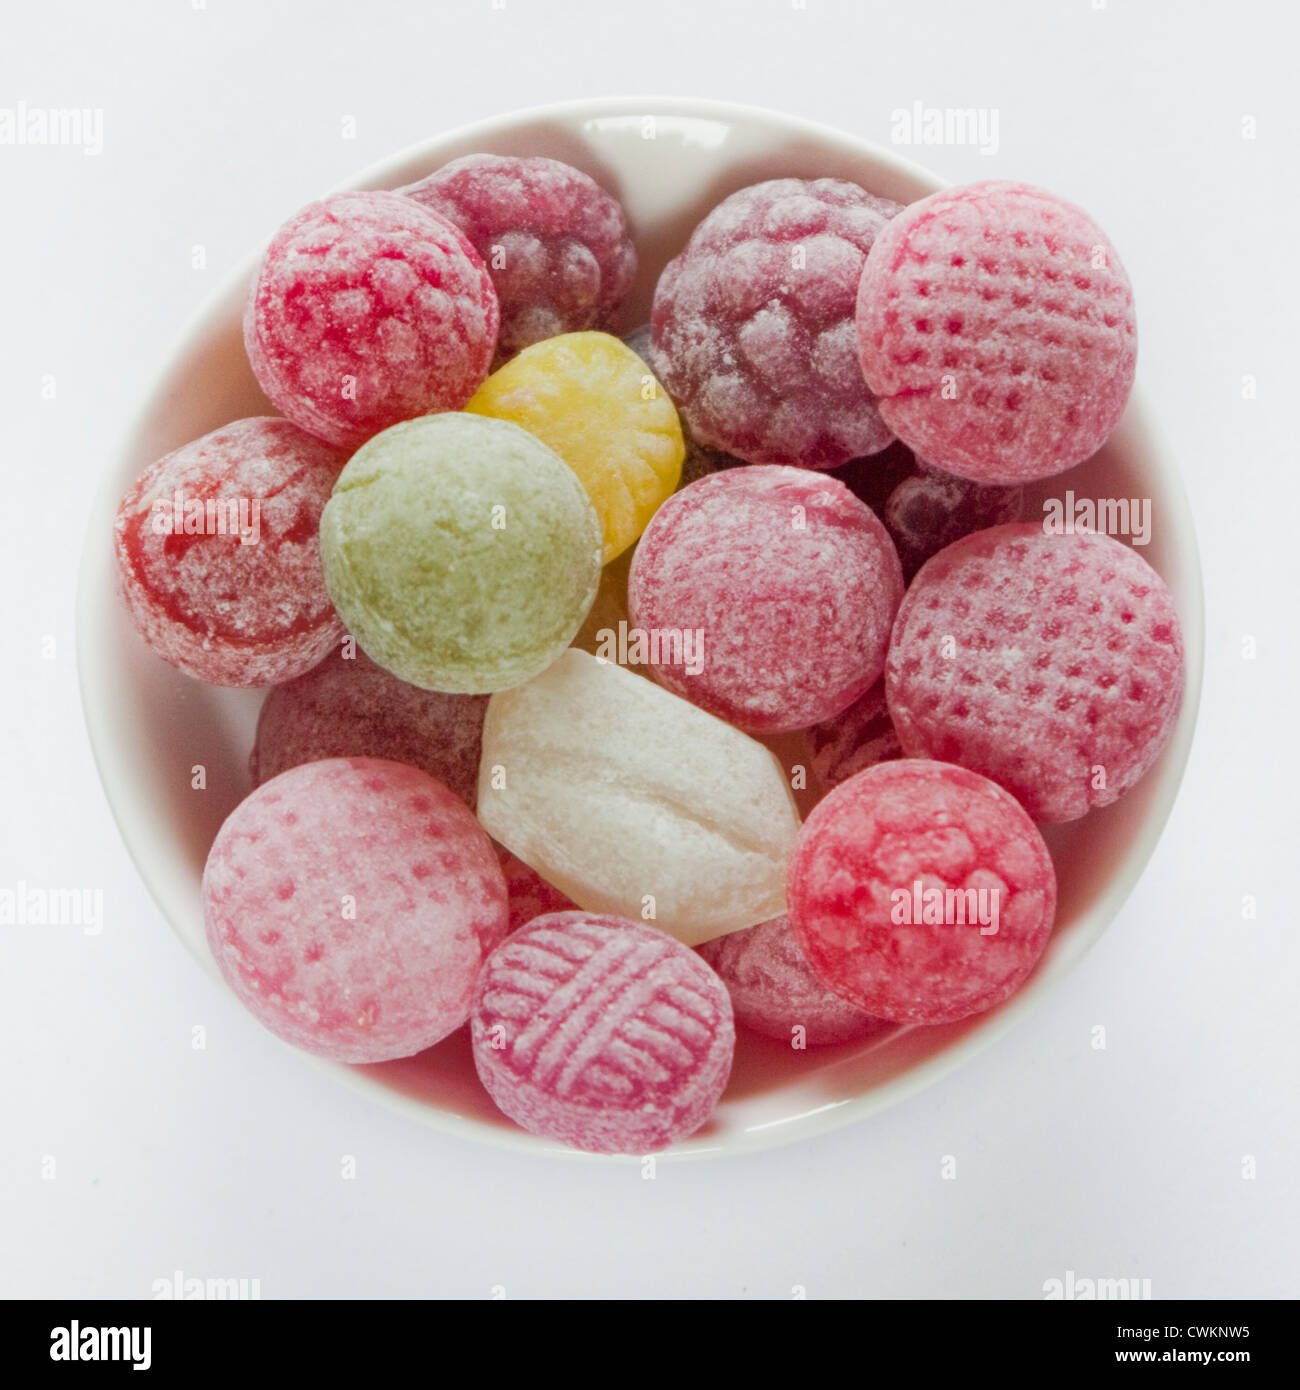 Some sweets in a white bowl Stock Photo